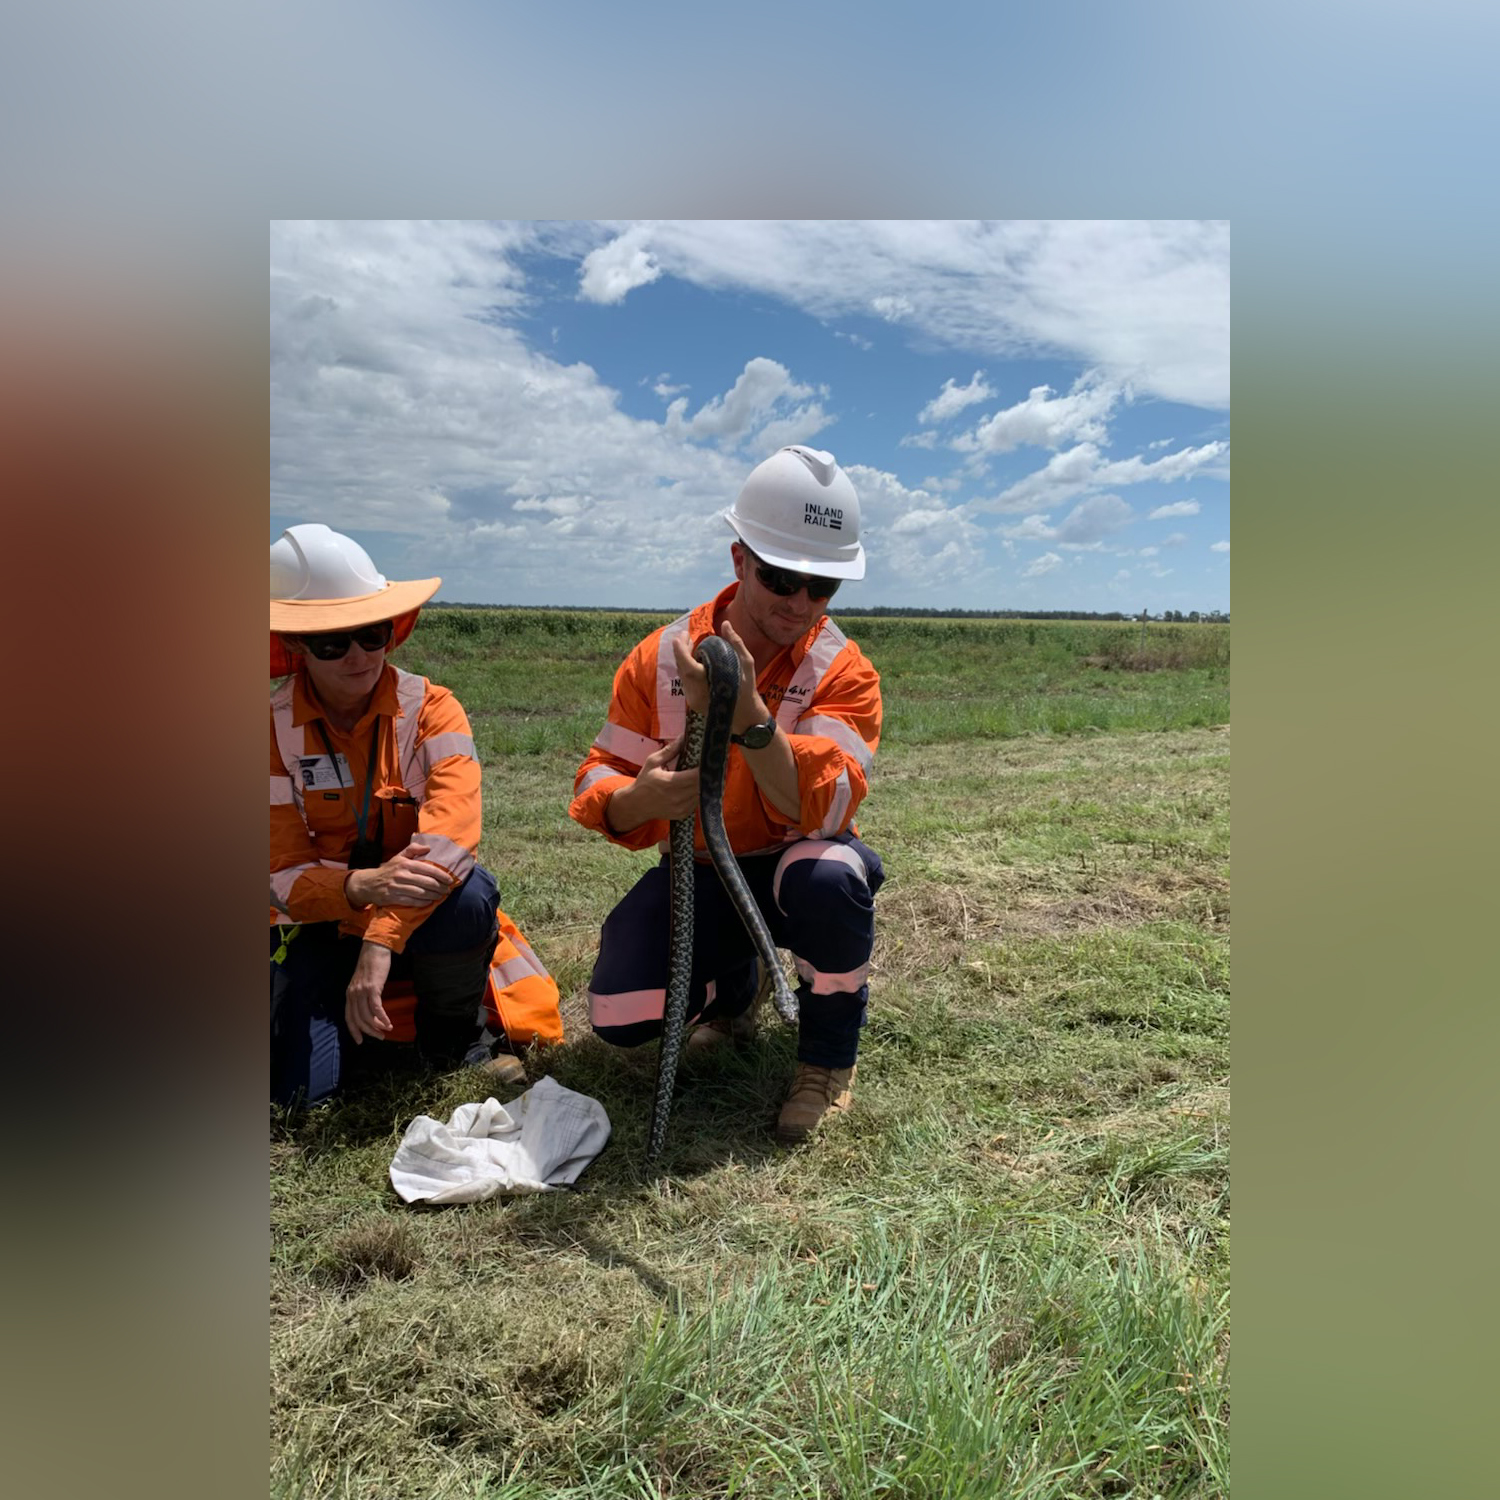 ARTC Inland Rail workers handling a snake as part of environmental monitoring works